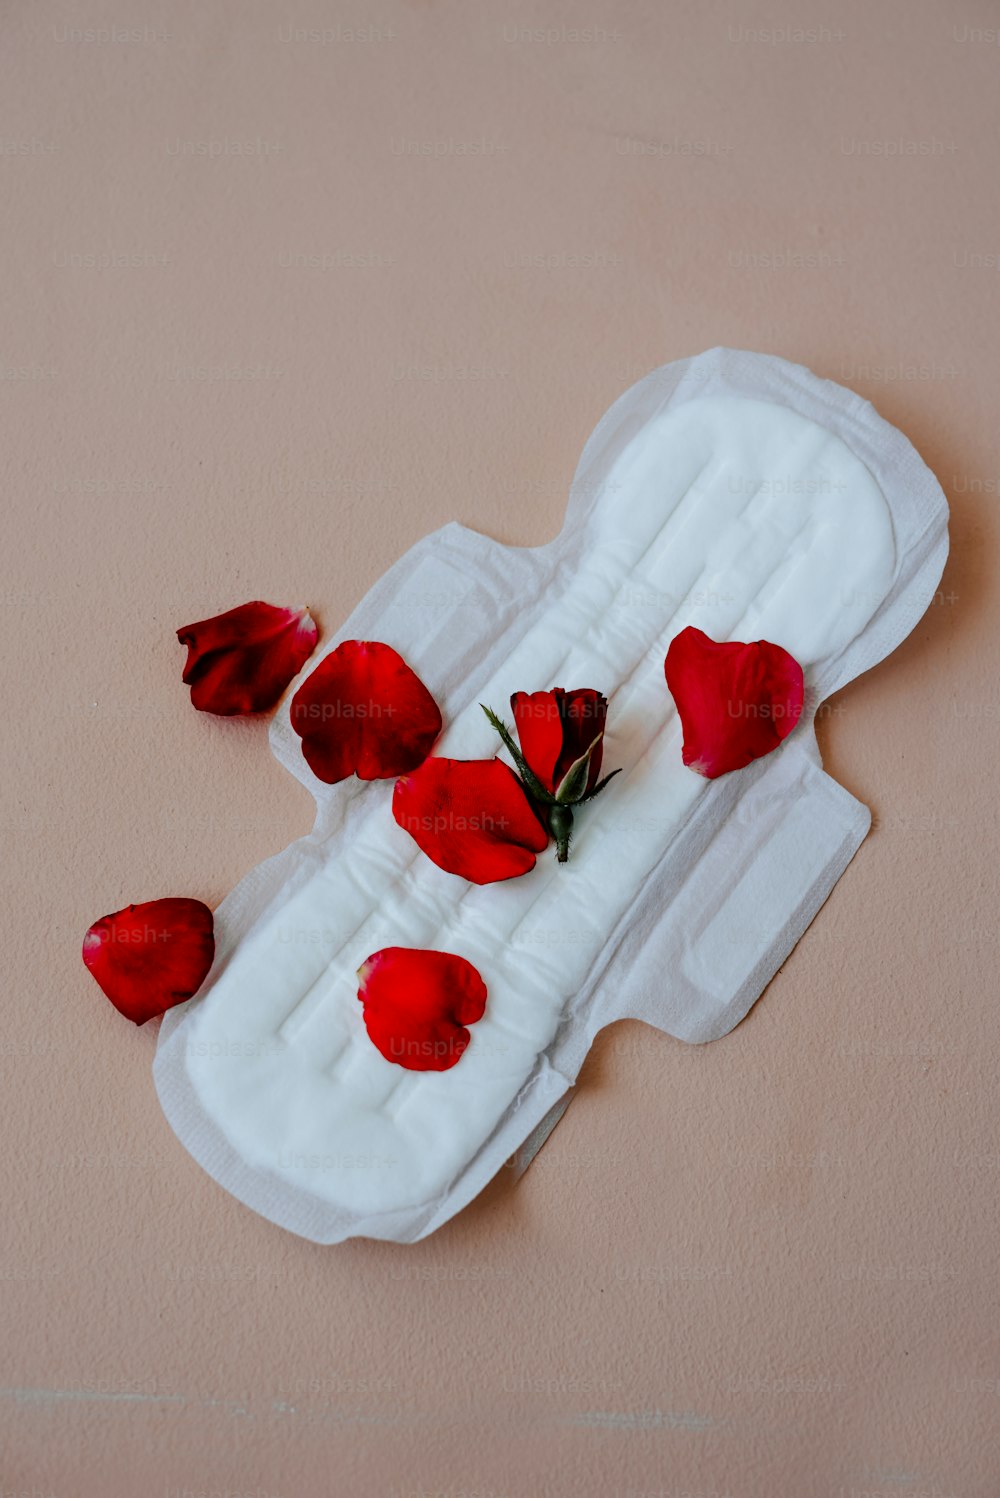 a pair of sanitary pads with red flowers on them